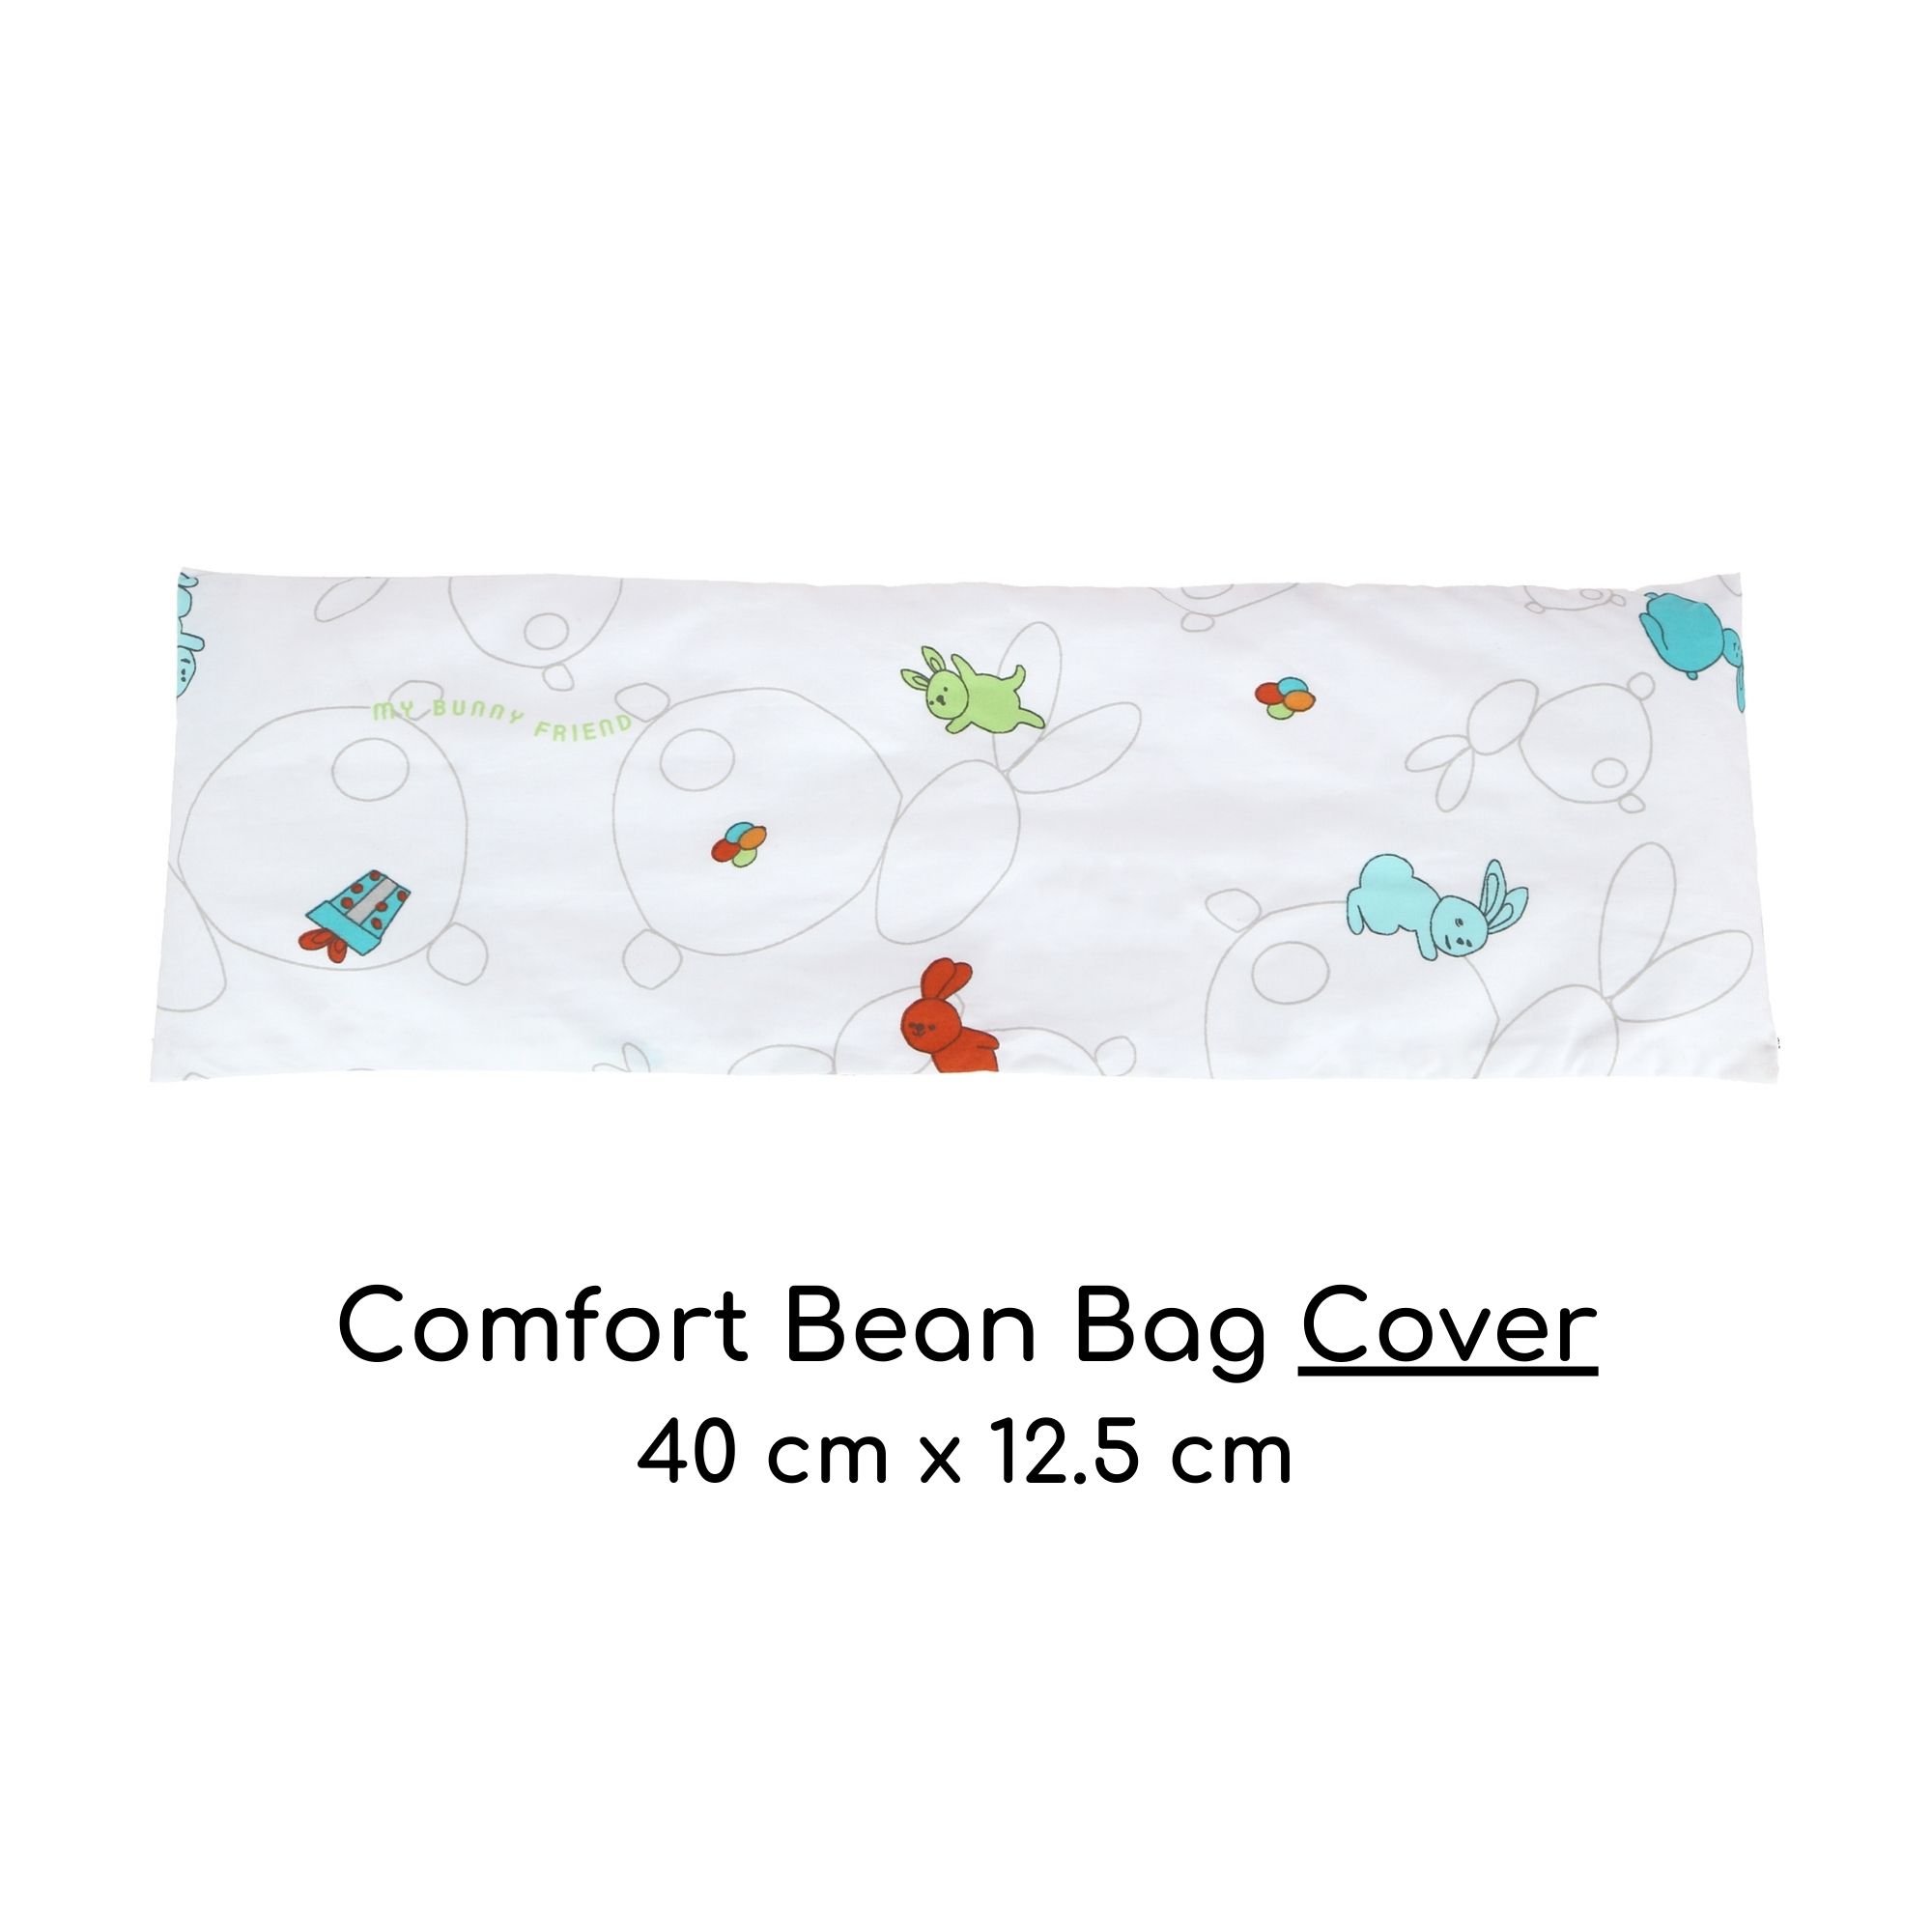 My Bunny Friend Baby Comfort Bean Bag Cover (40x12.5cm) - Bunny Party